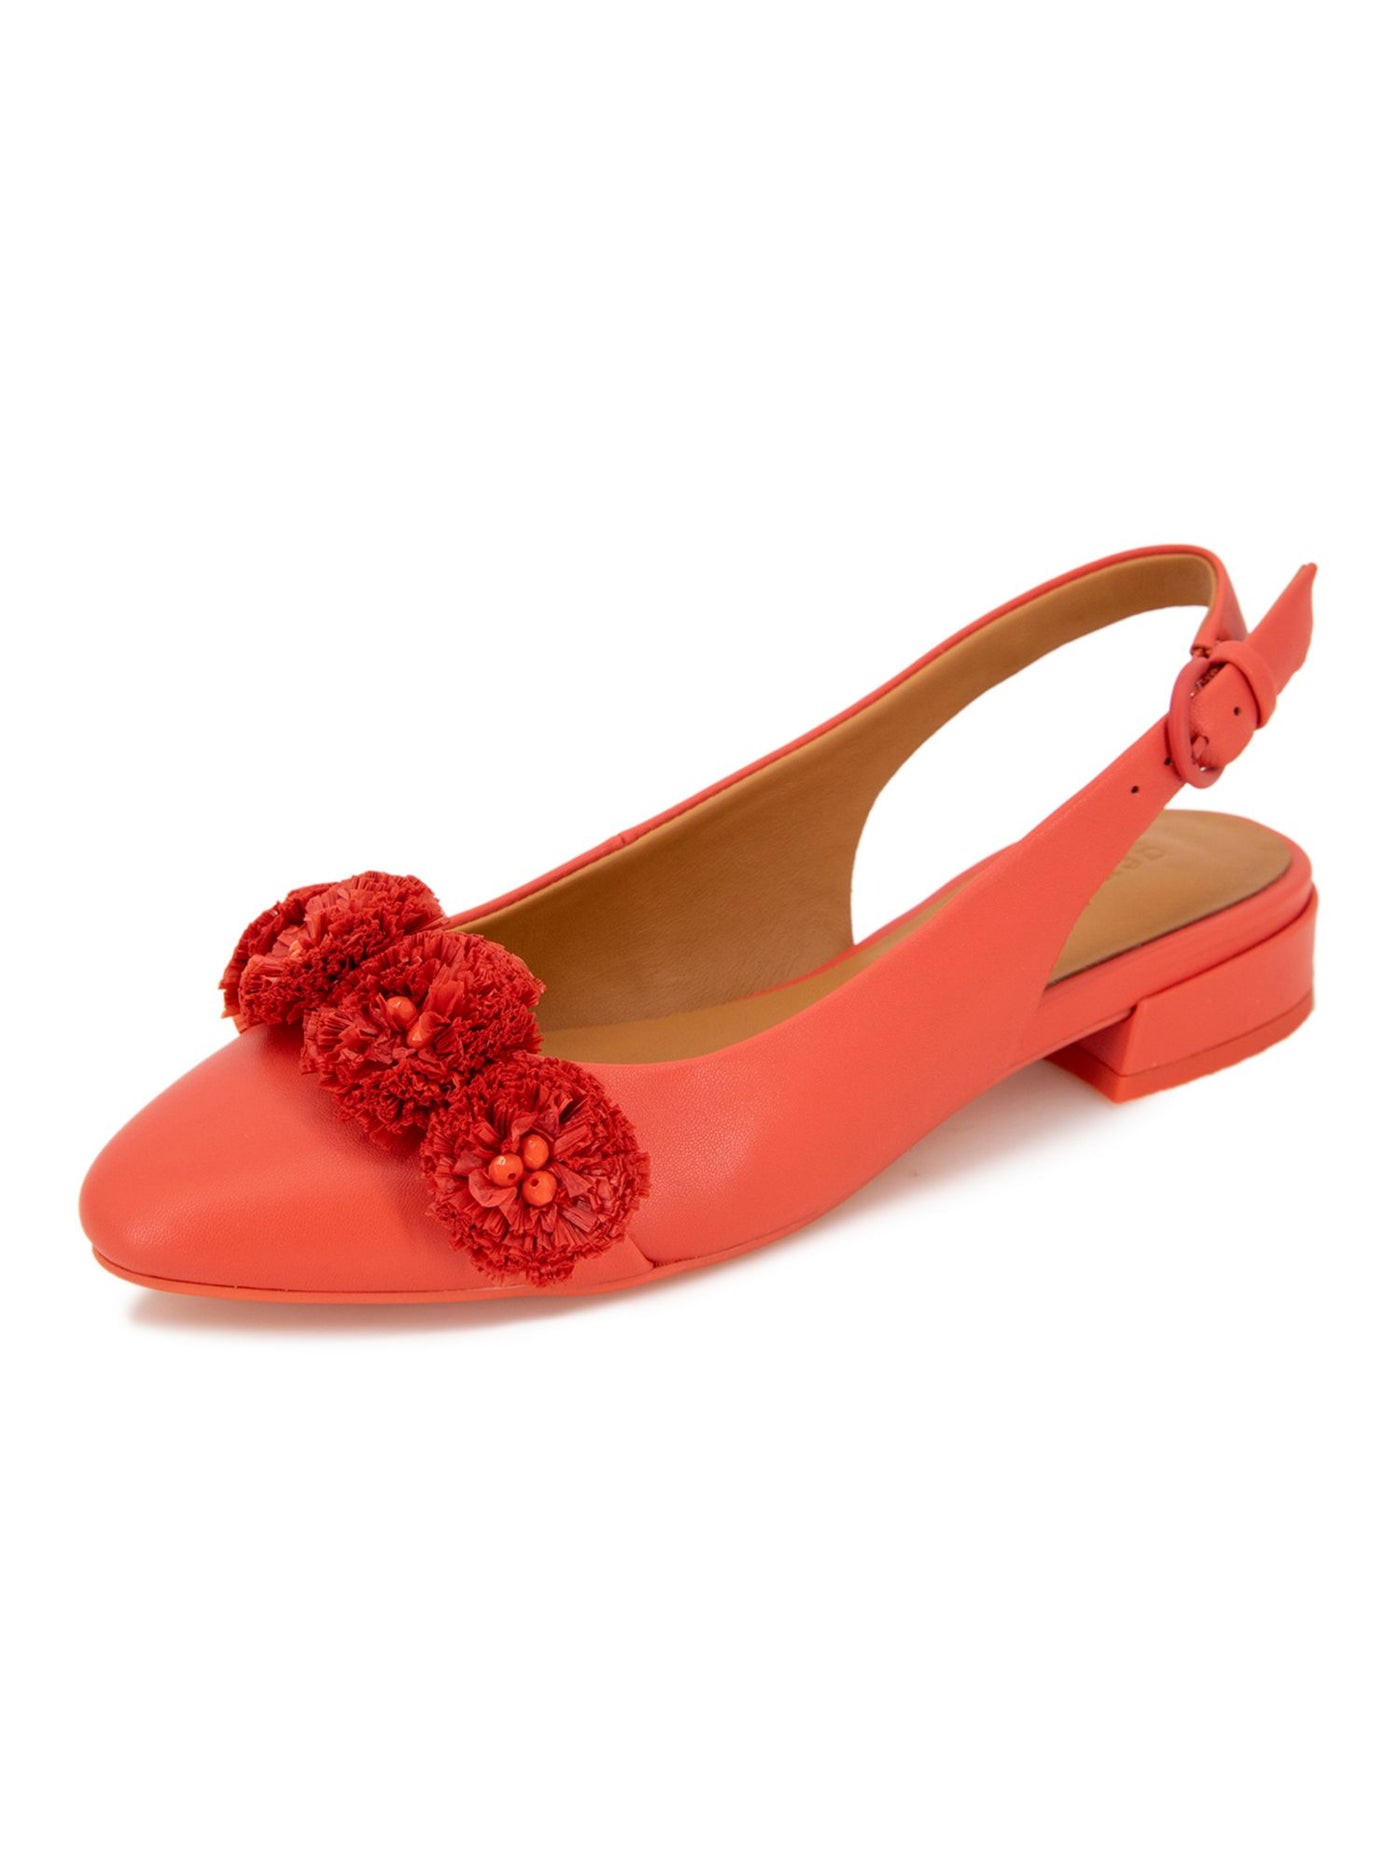 GENTLE SOULS KENNETH COLE Womens Coral Pom Pom At Vamp Cushioned Anana Pointy Toe Buckle Leather Slingback Sandal 6 M